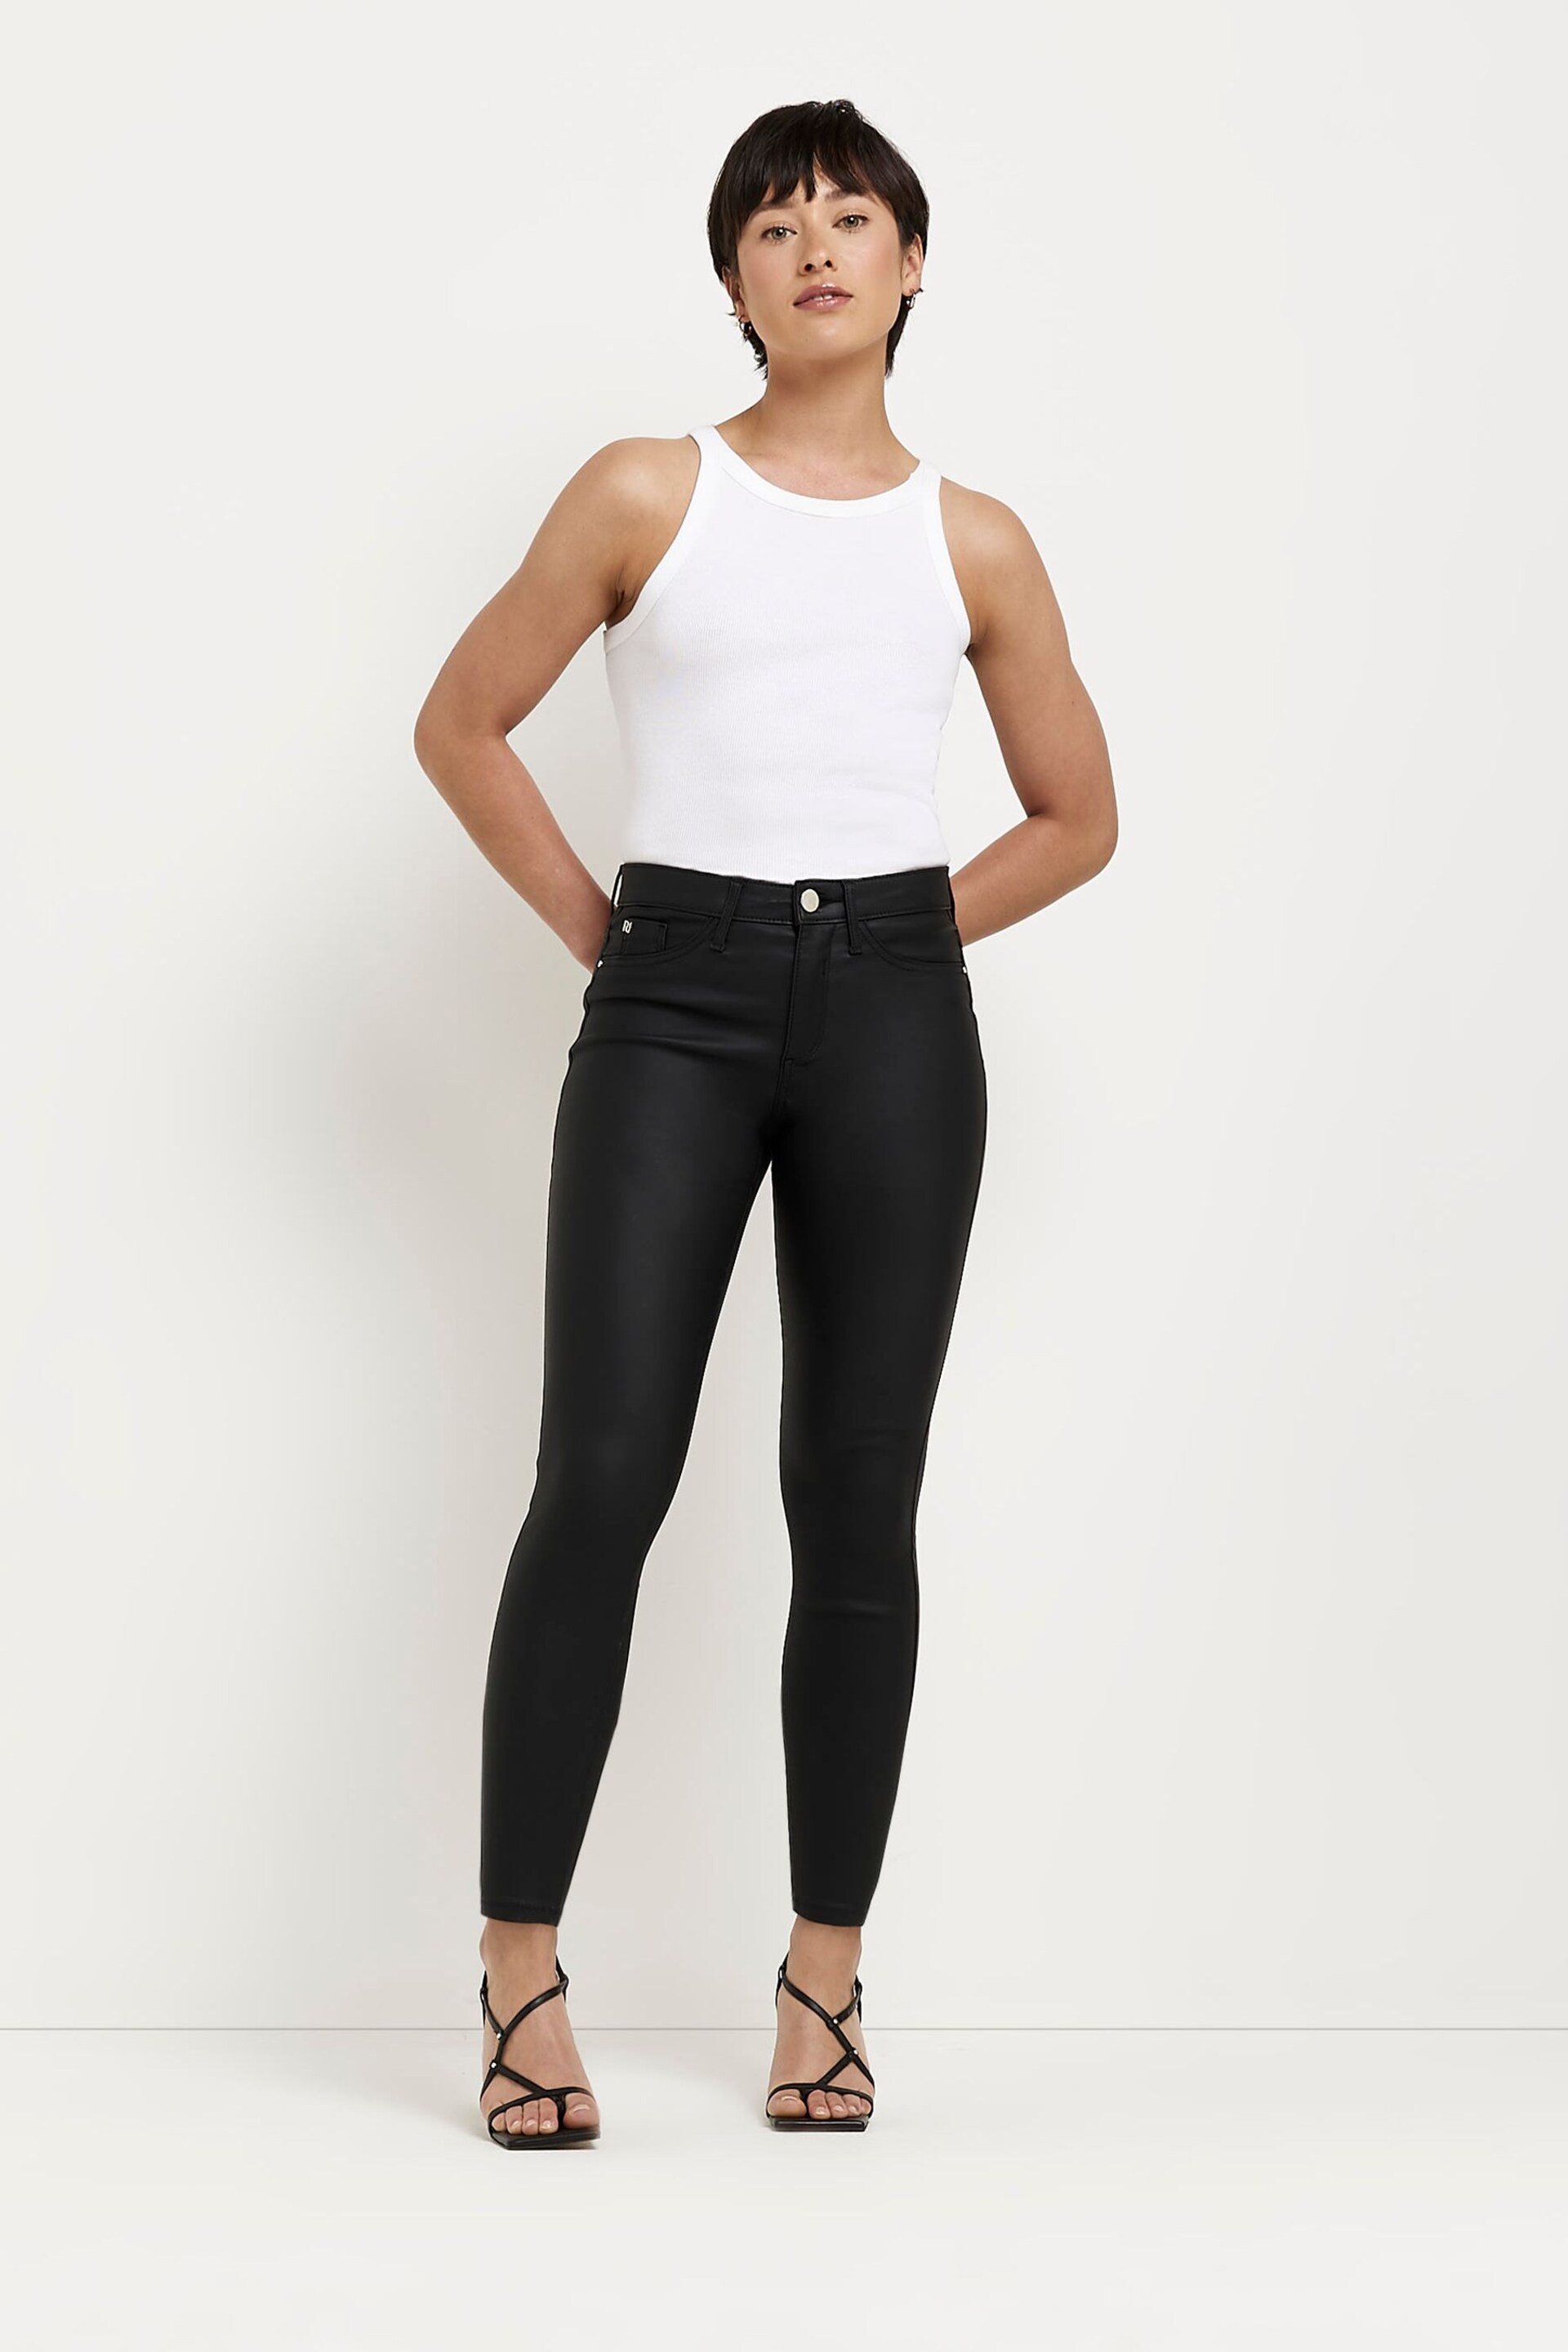 River Island Black Petite Mid Rise Coated Skinny Jeans - Image 3 of 5